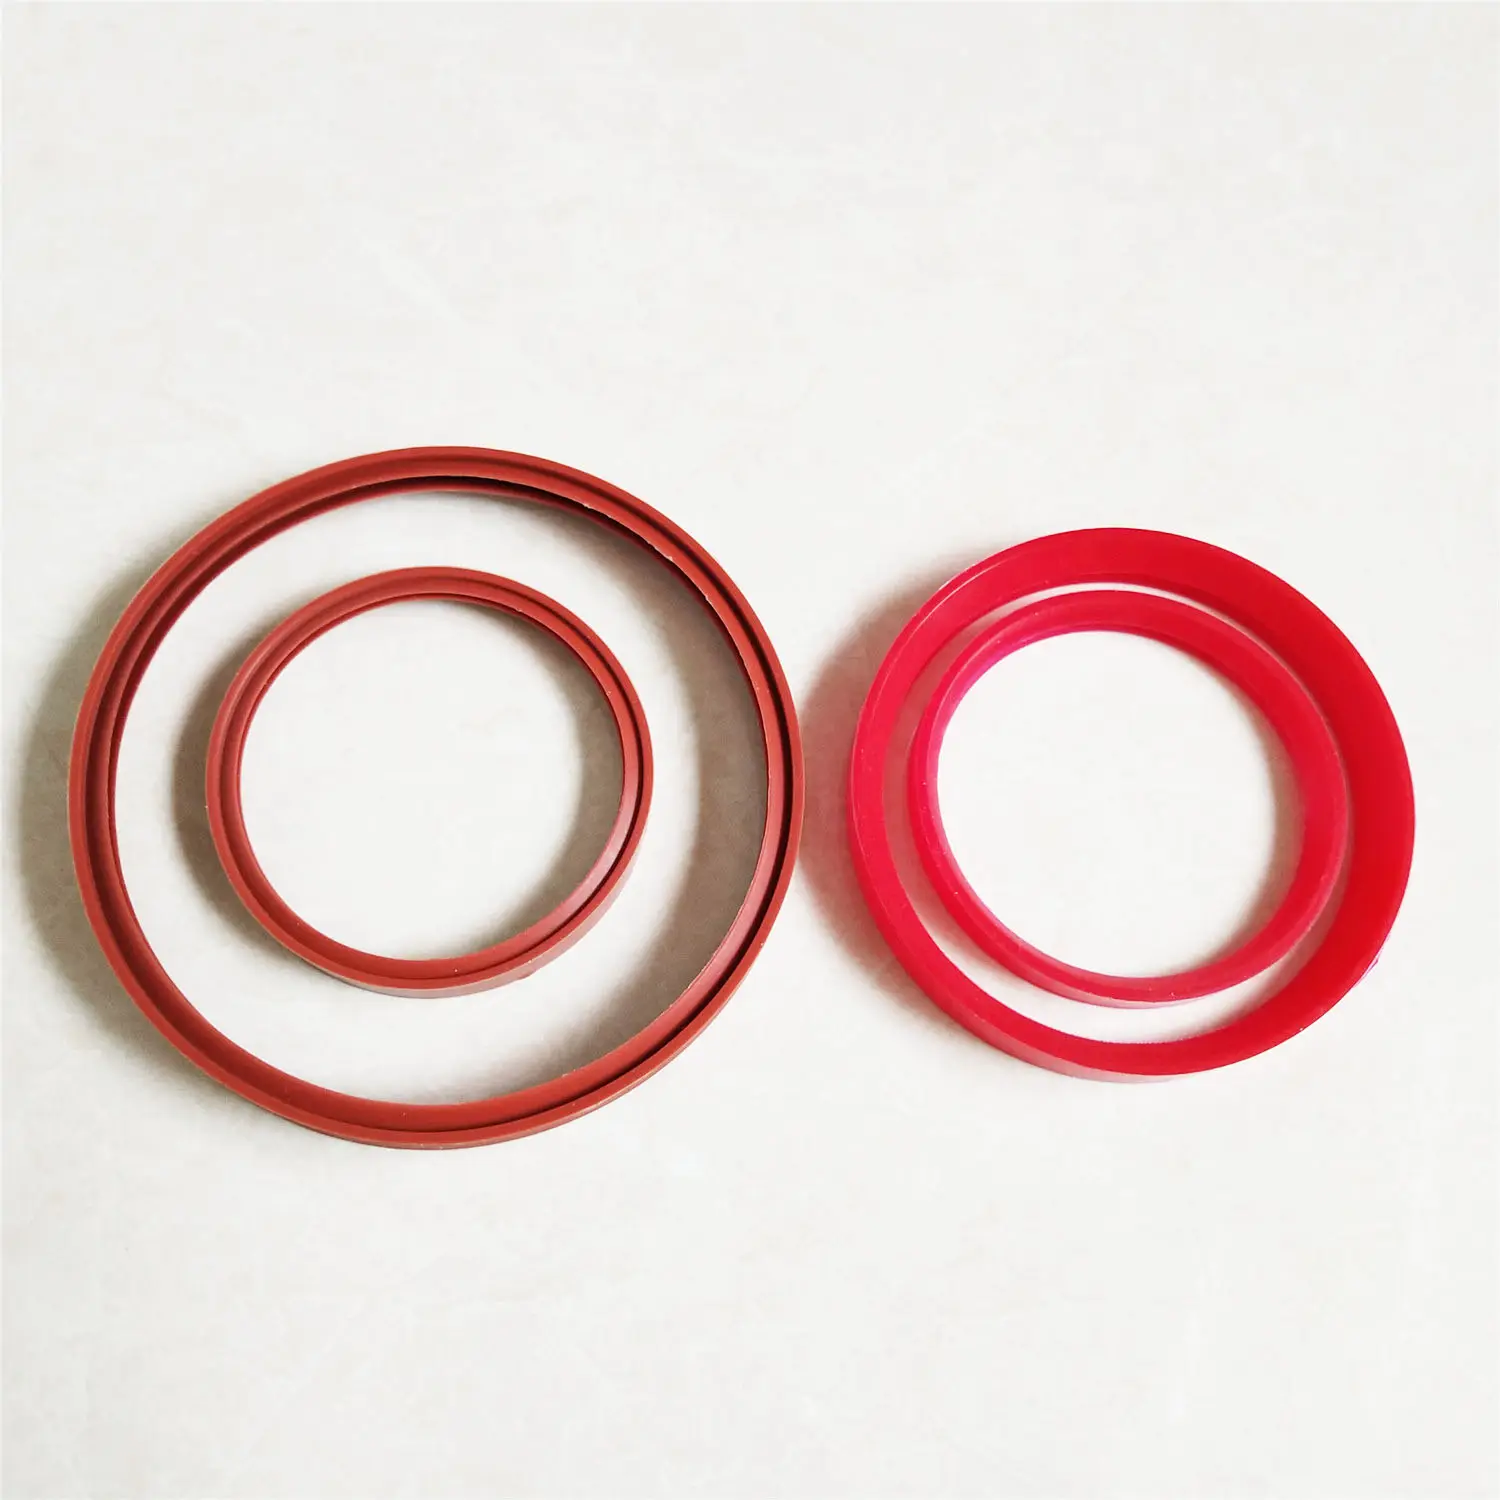 60mm Chimney flue seal silicone rubber materials chimney pipe gasket for Gas boiler / water heater / Camp stove